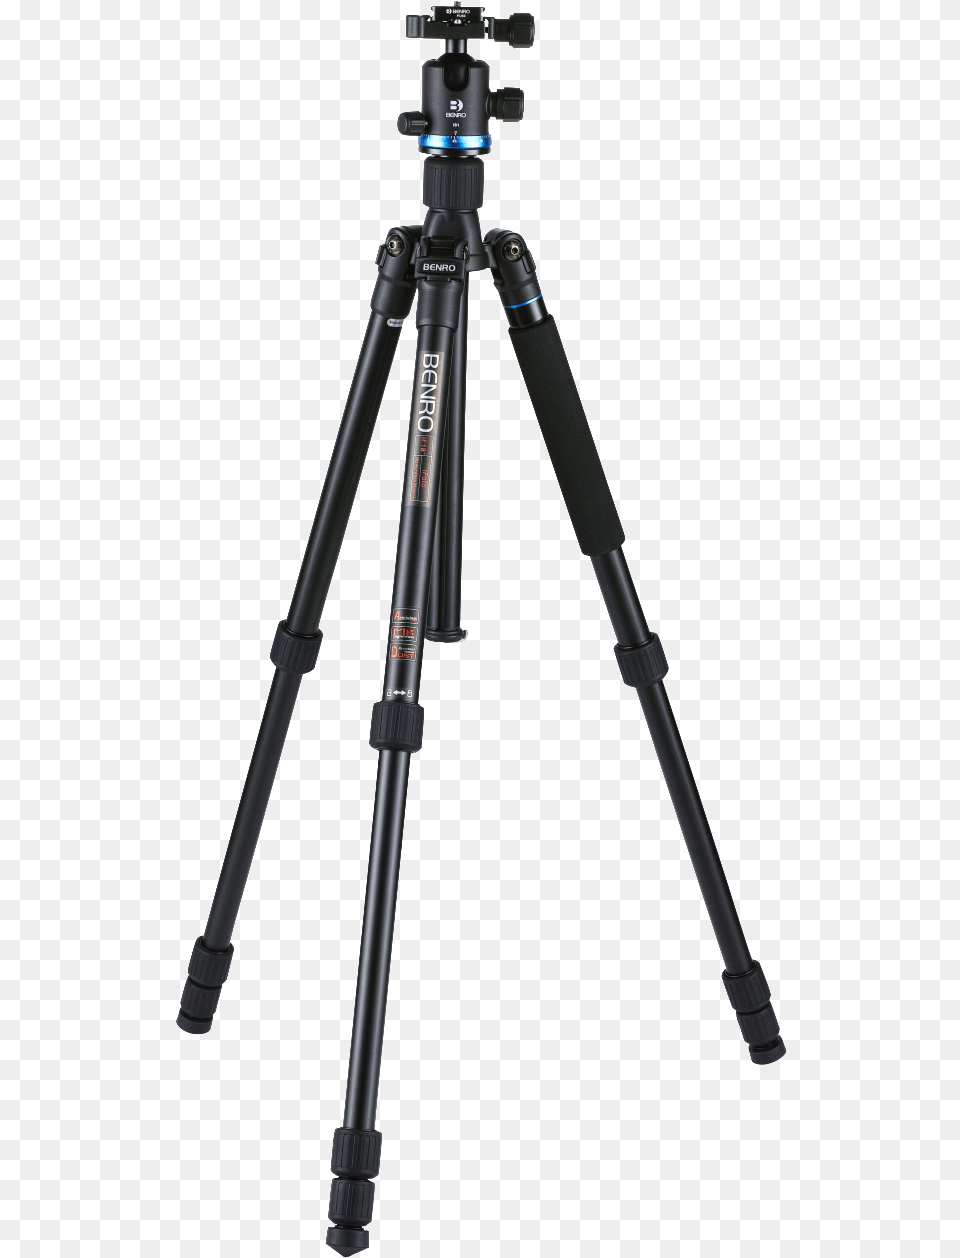 This Product Design Is Camera Tripod Tripod Camera Free Transparent Png